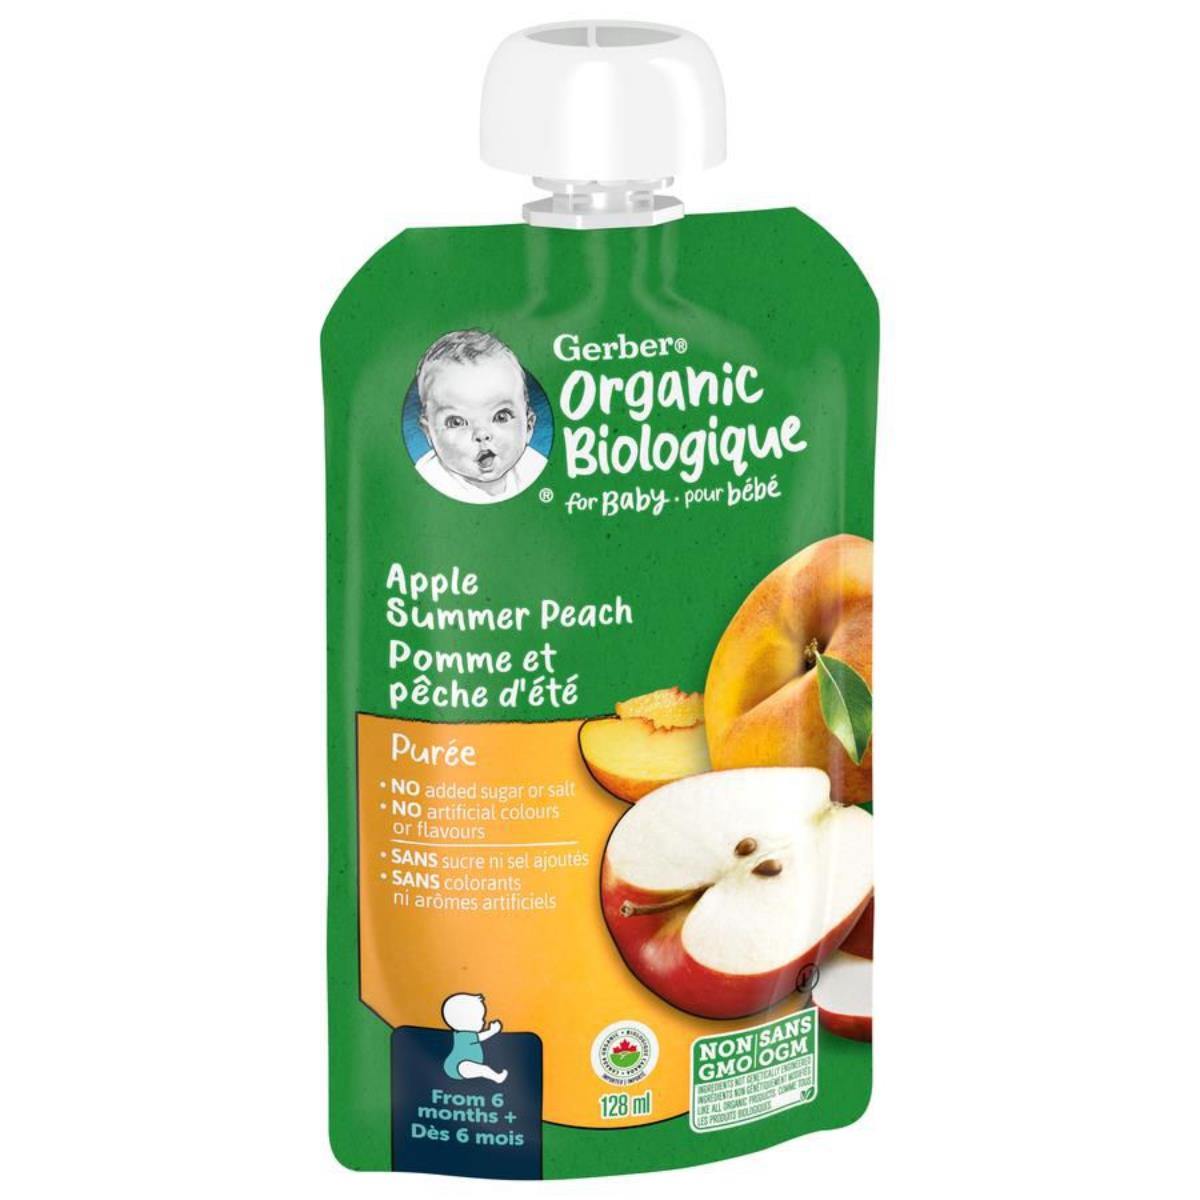 Gerber Organic Biologique for Baby, 2nd Foods for Sitter, Apple Summer Peach